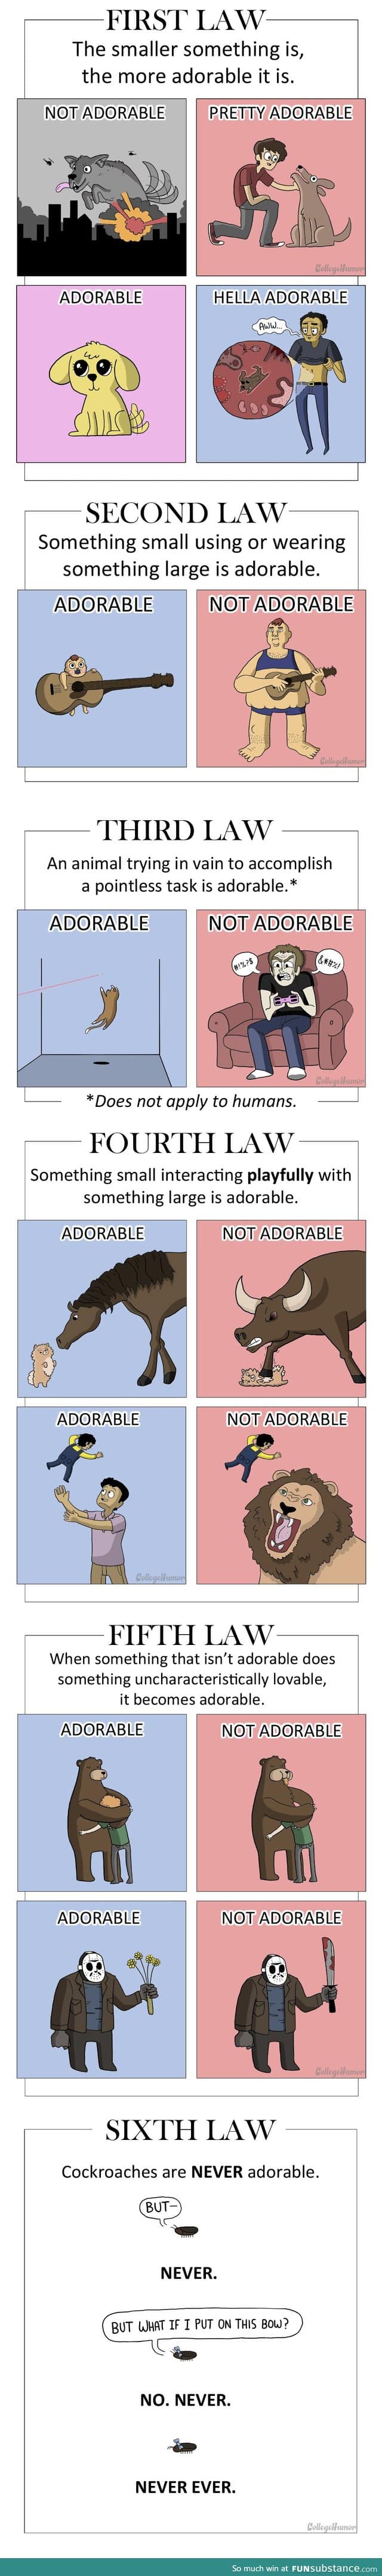 The Laws of Adorability.